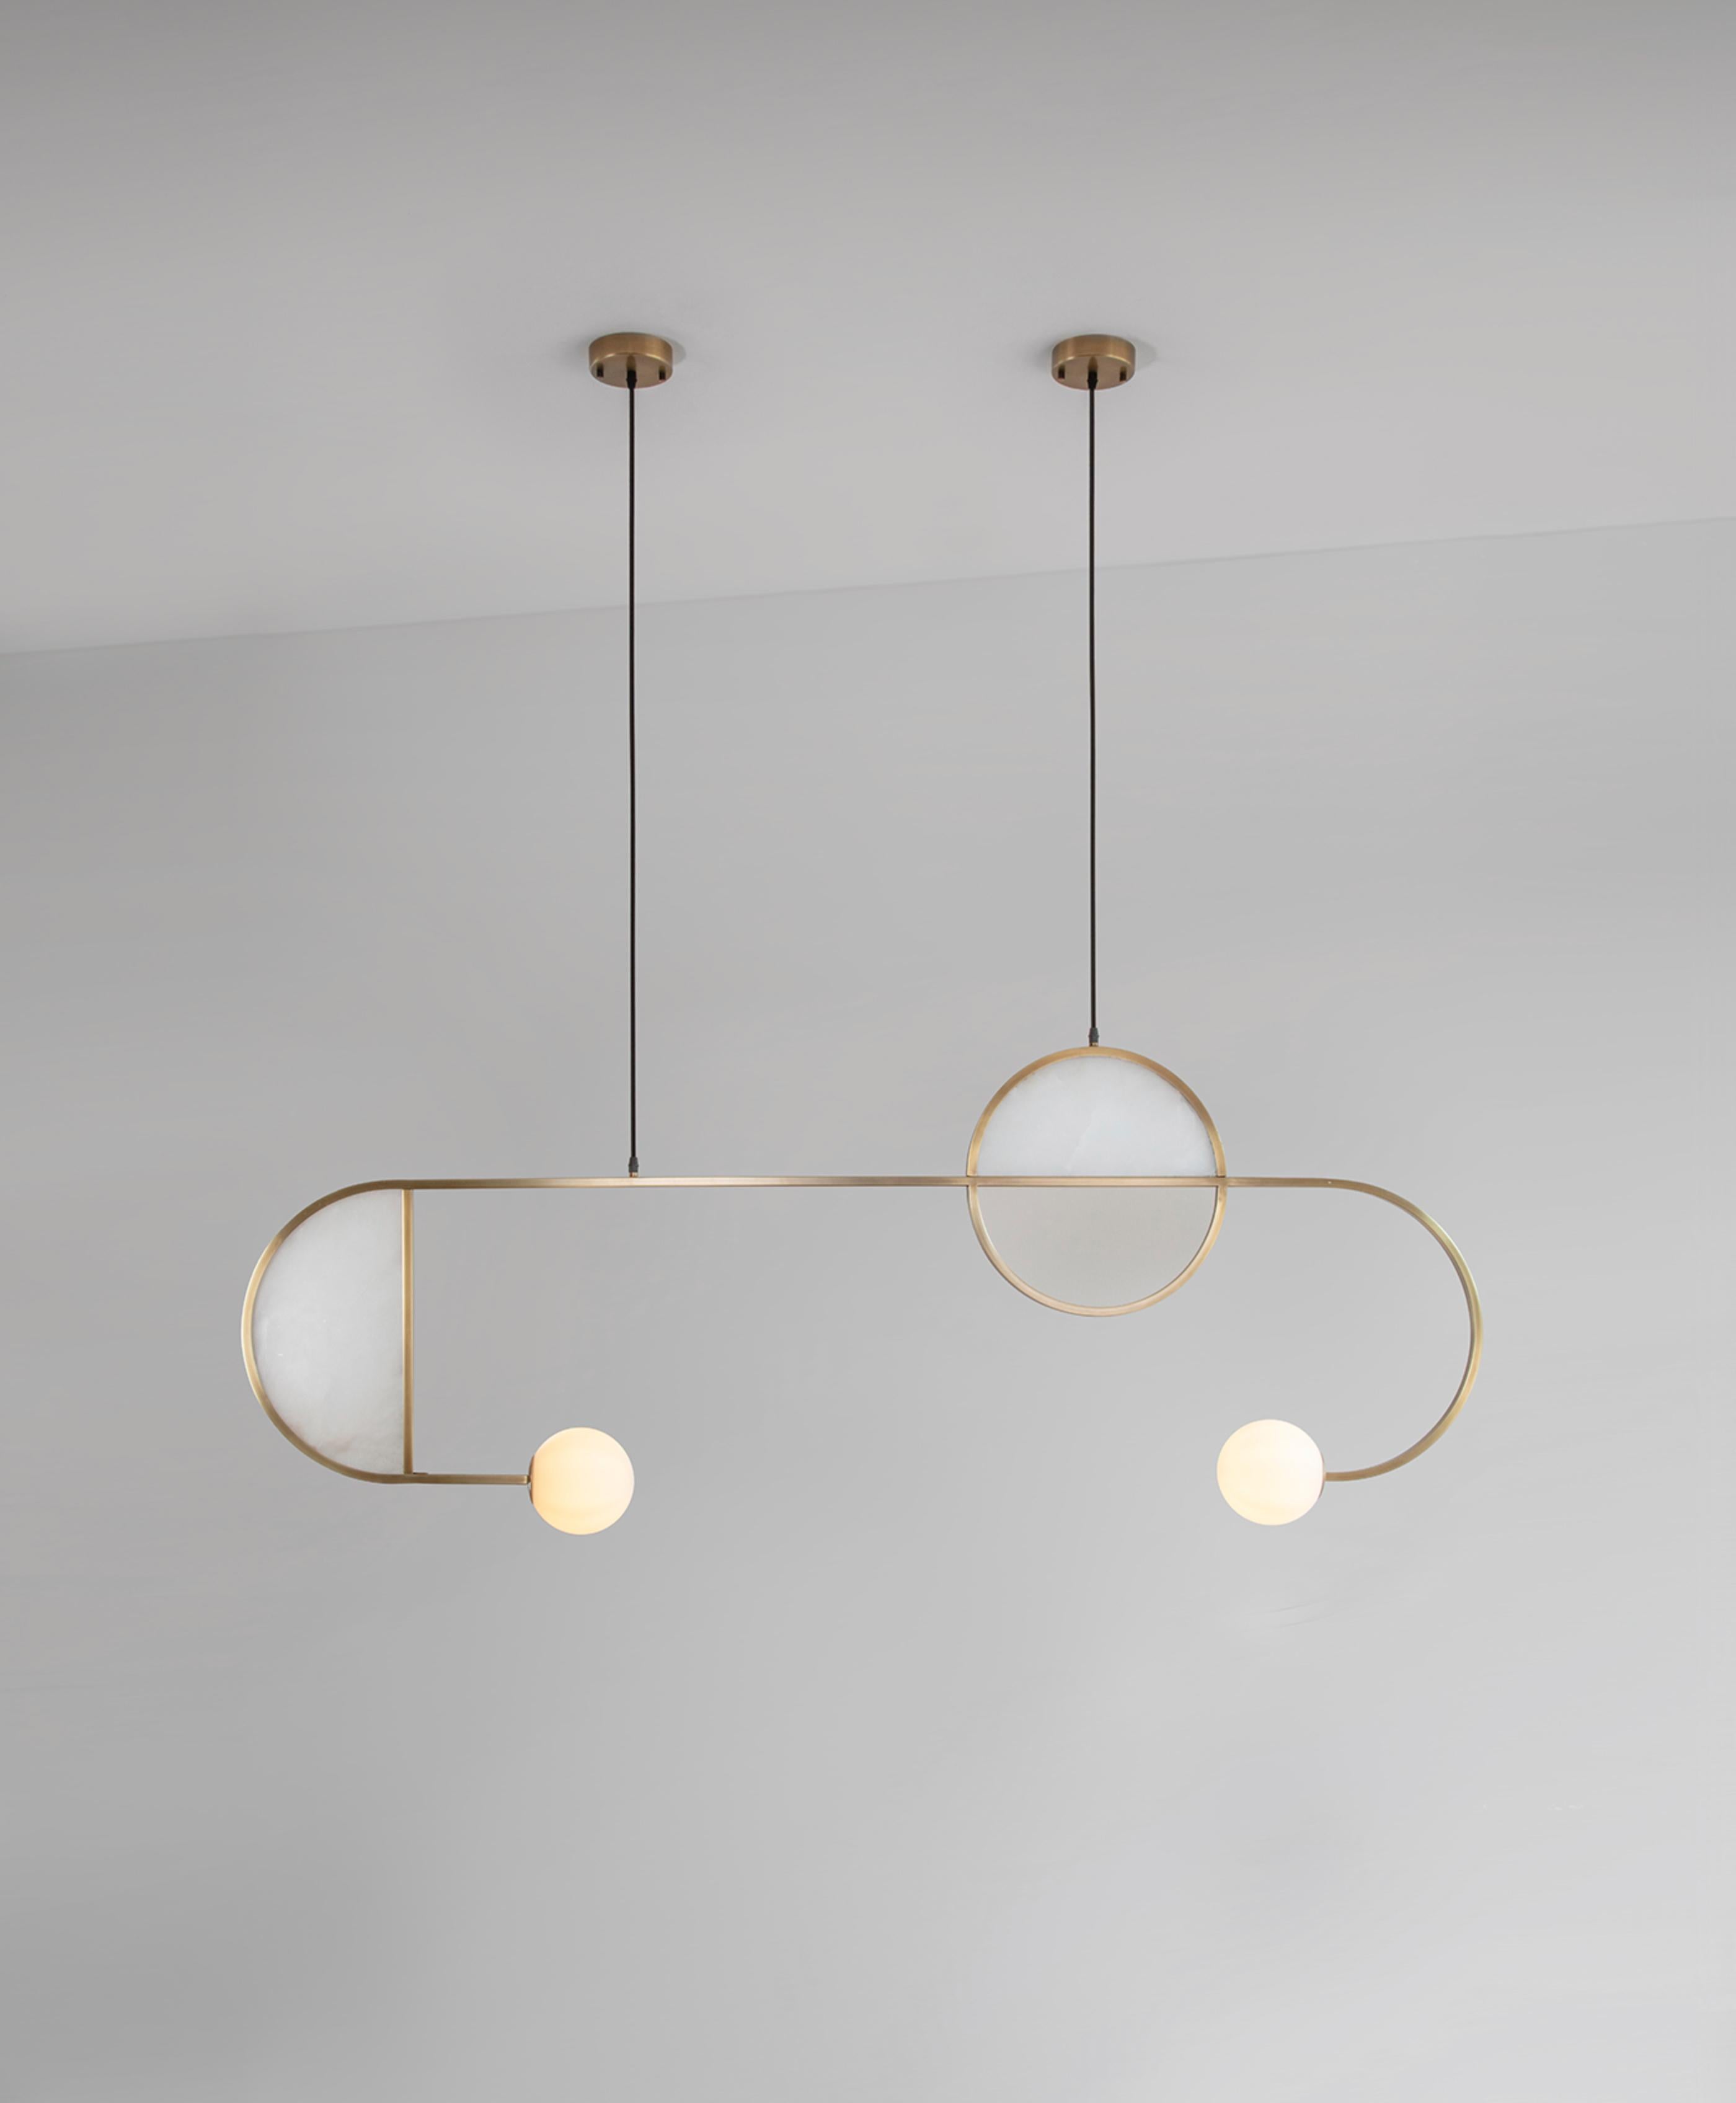 Cutting Edge Pendant Lamp by Square in Circle
Dimensions: H 135 x W 16 x D 177 cm
Materials: Brushed brass finish, alabaster marble, opaque glass globe.

A statement pendant light with a thin metal frame, marble panels inserted into semi-circles and